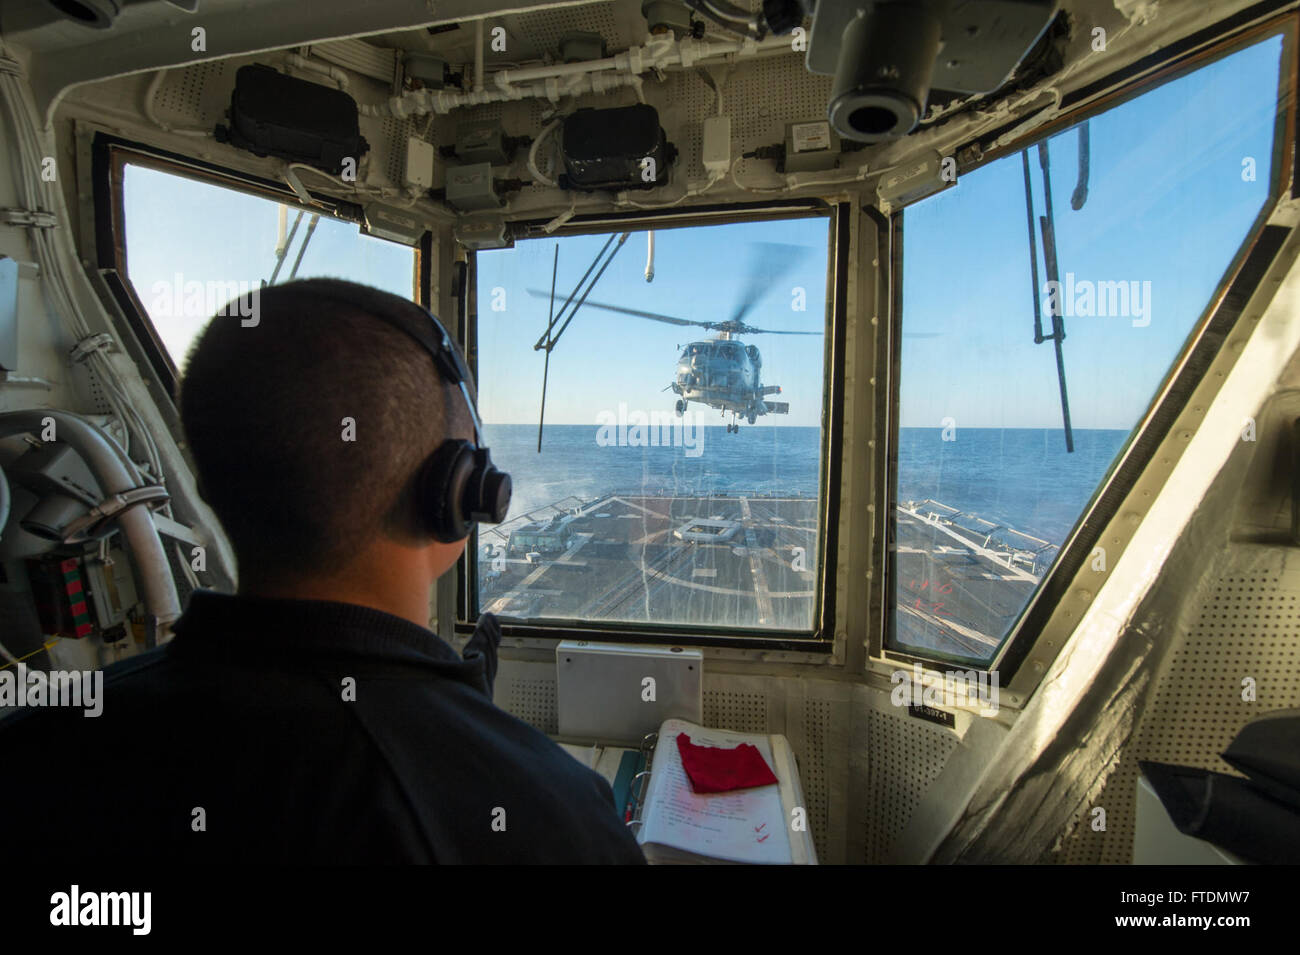 131023-N-NU634-068: MEDITERRANEAN SEA (Oct. 23, 2013) – Lt.j.g. Shaun McGahan watches as an SH-60R Seahawk prepares to land on the flight deck aboard the Arleigh Burke-class guided missile destroyer USS Gravely (DDG 107). Gravely, homeported in Norfolk, Va., is on a scheduled deployment supporting maritime security operations and theater security cooperation efforts in the 6th Fleet area of operations. (U.S. Navy photo by Mass Communication Specialist 3rd Class Darien G. Kenney/Released) Stock Photo